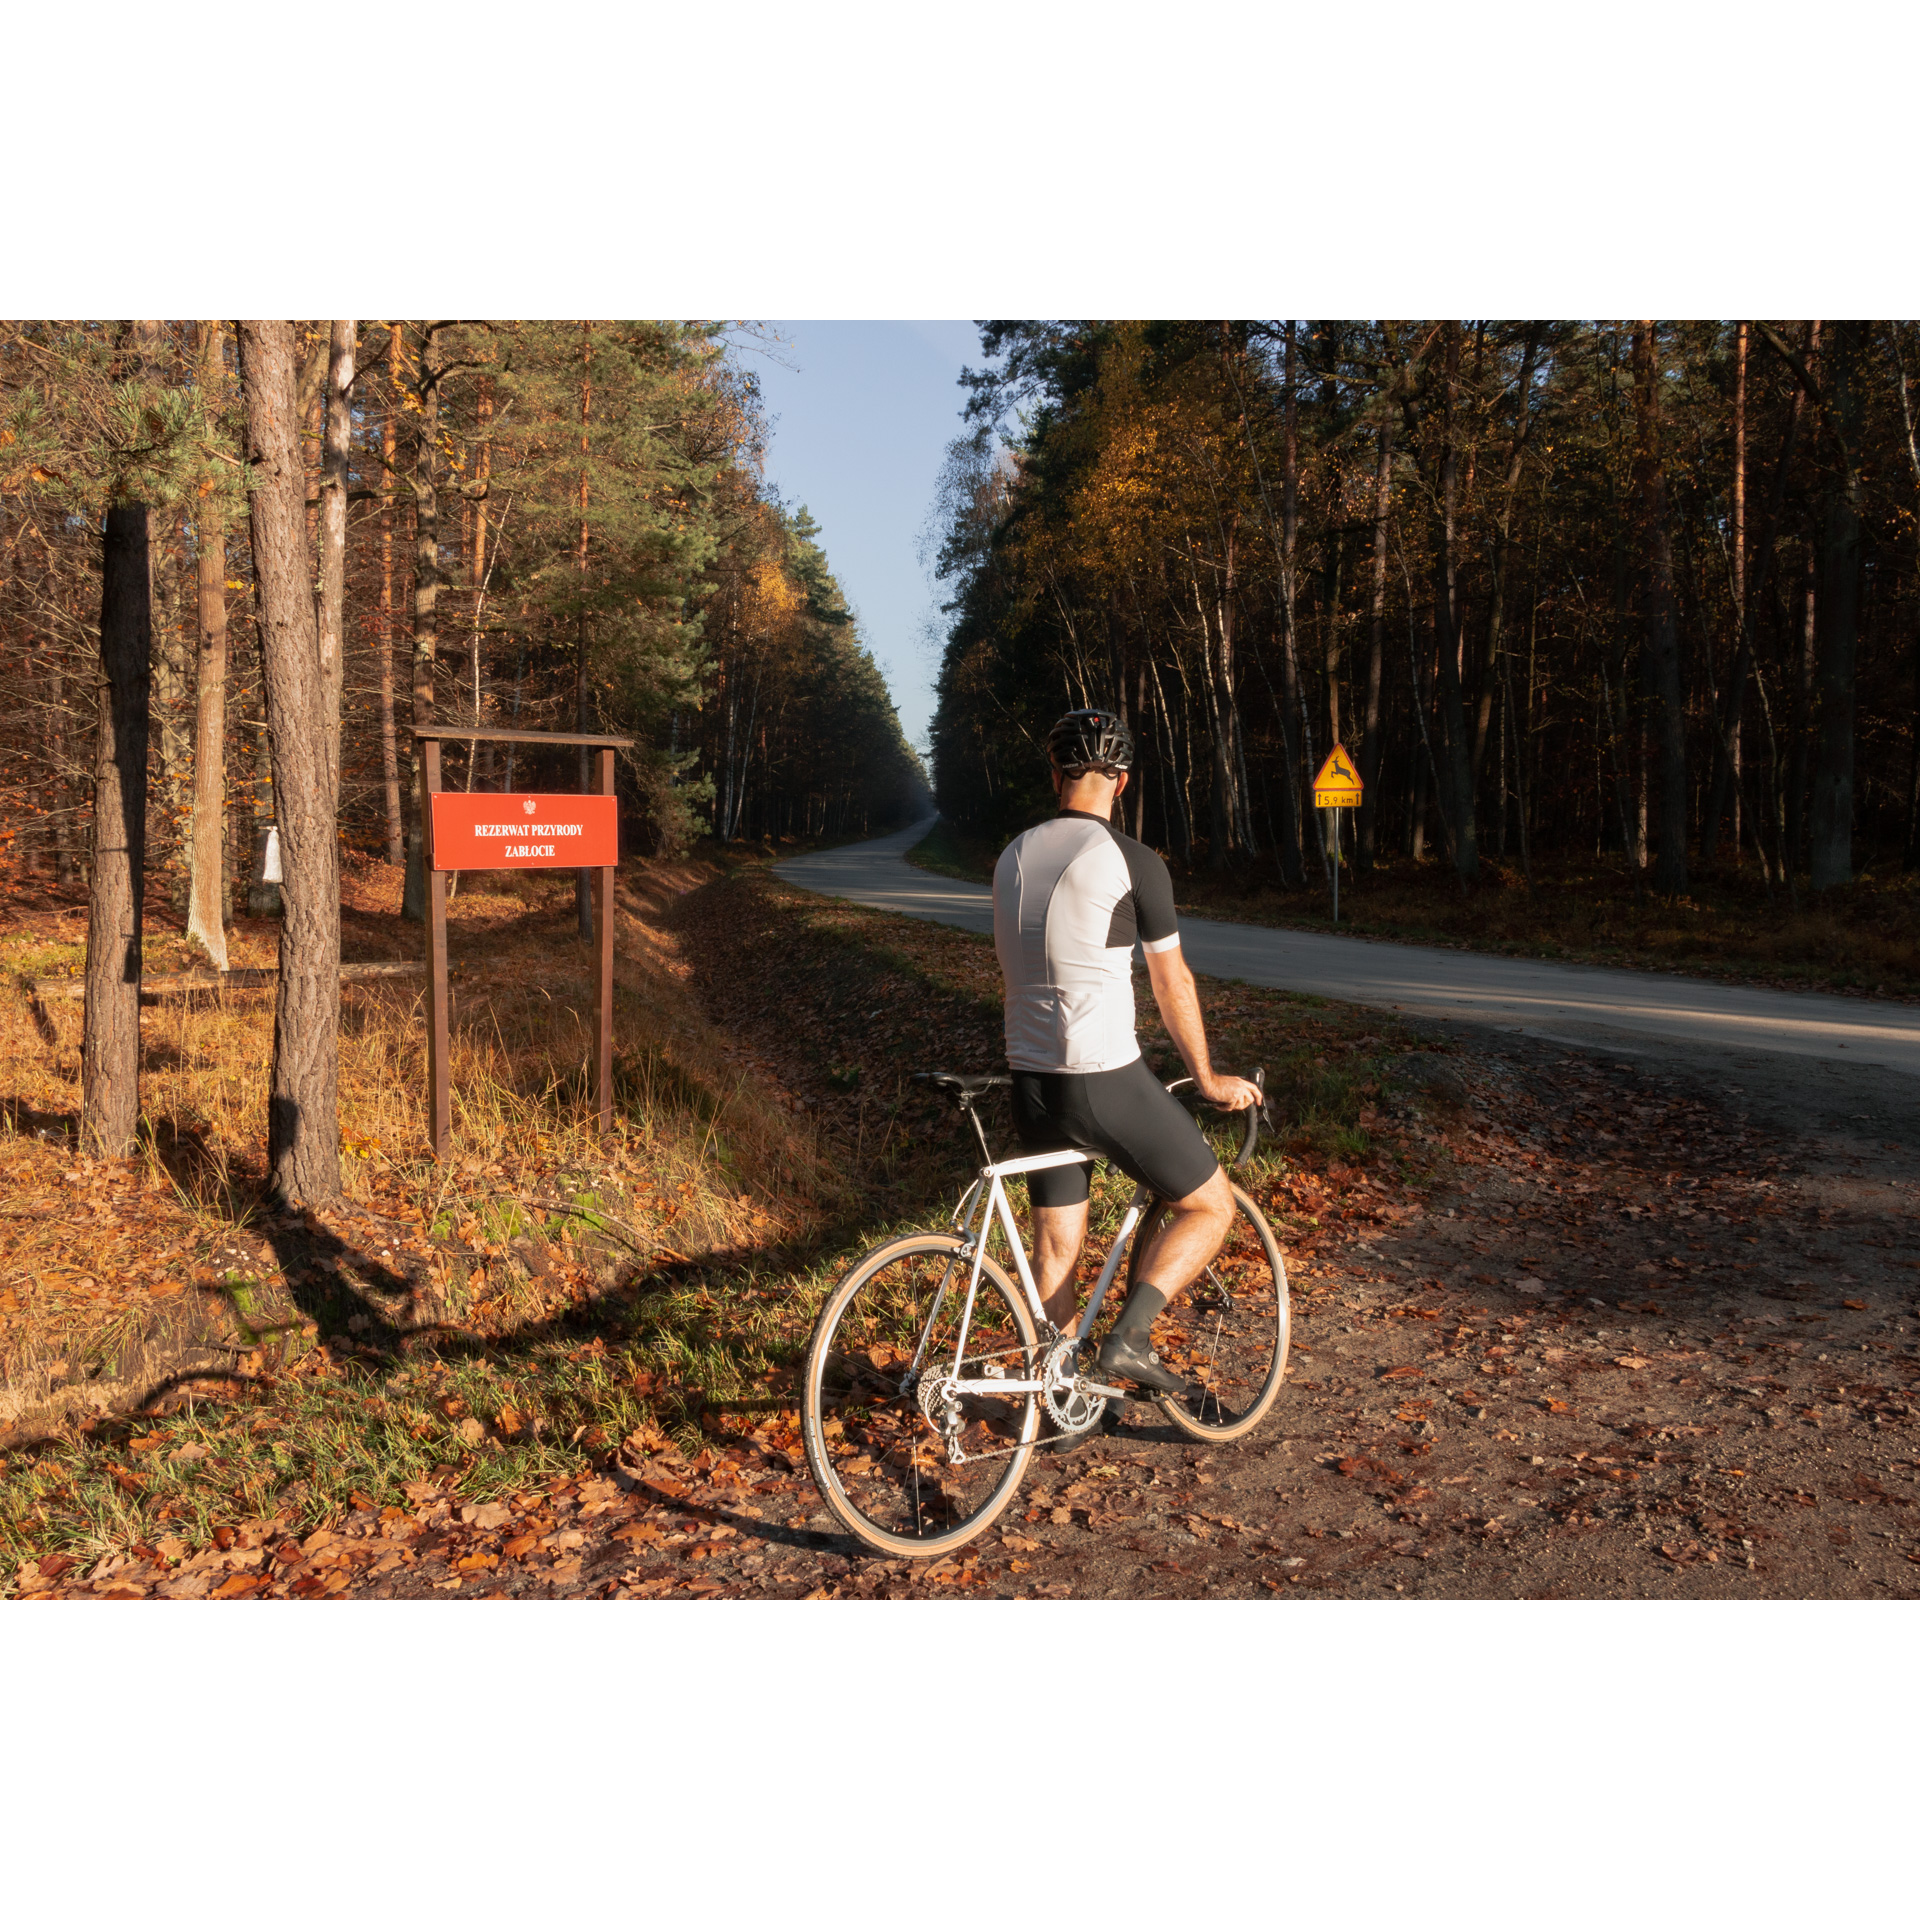 A cyclist in a black and white outfit stopping in the autumn forest on a side road looking ahead towards the asphalt road